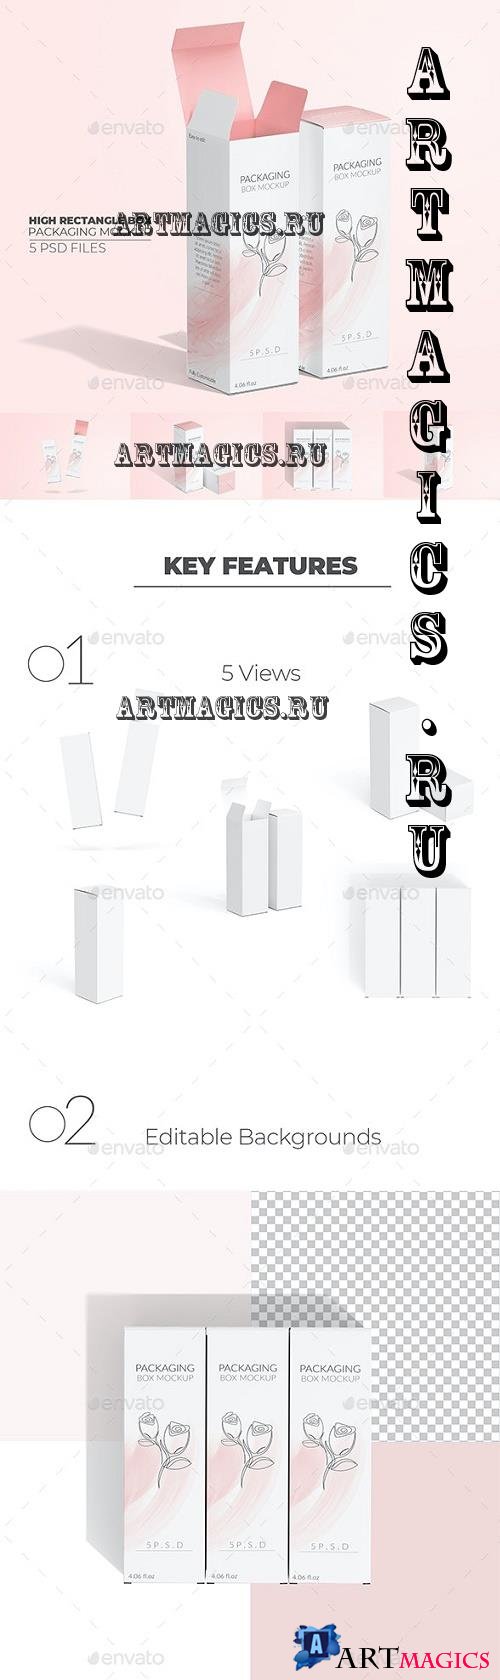 Package Box Mockup – High/Tall Rectangle - 33613756 - 6888782